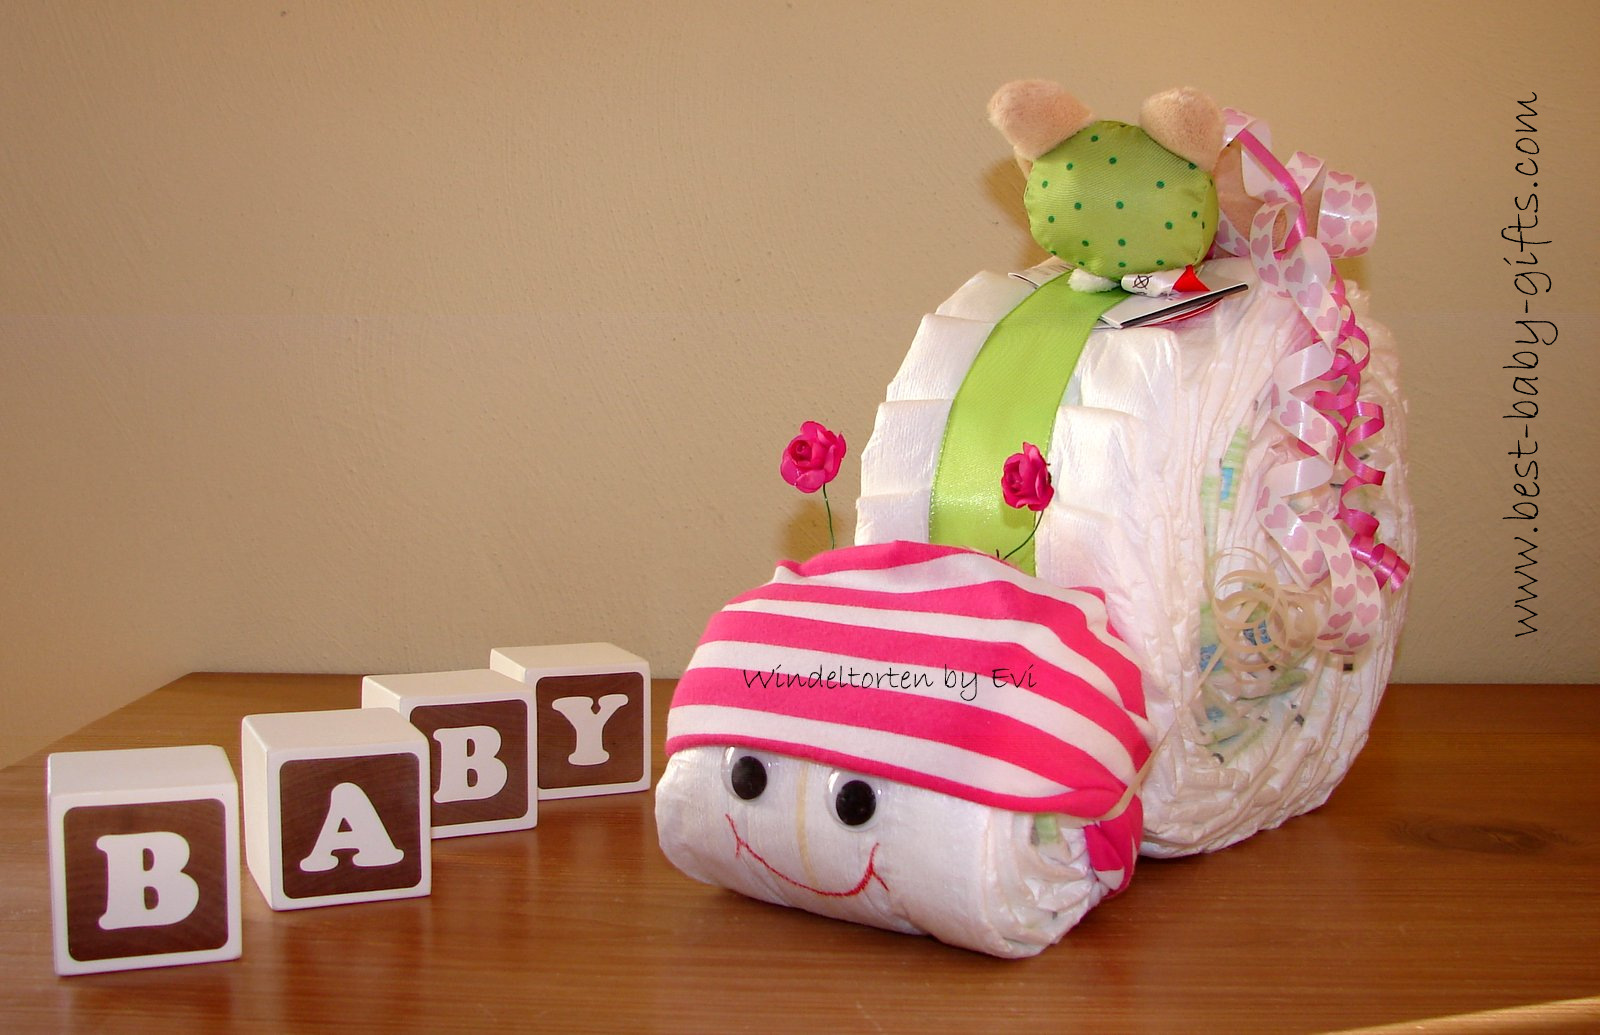 DIY personalised baby gift | Diy baby gifts, Baby gifts, Baby boy gifts